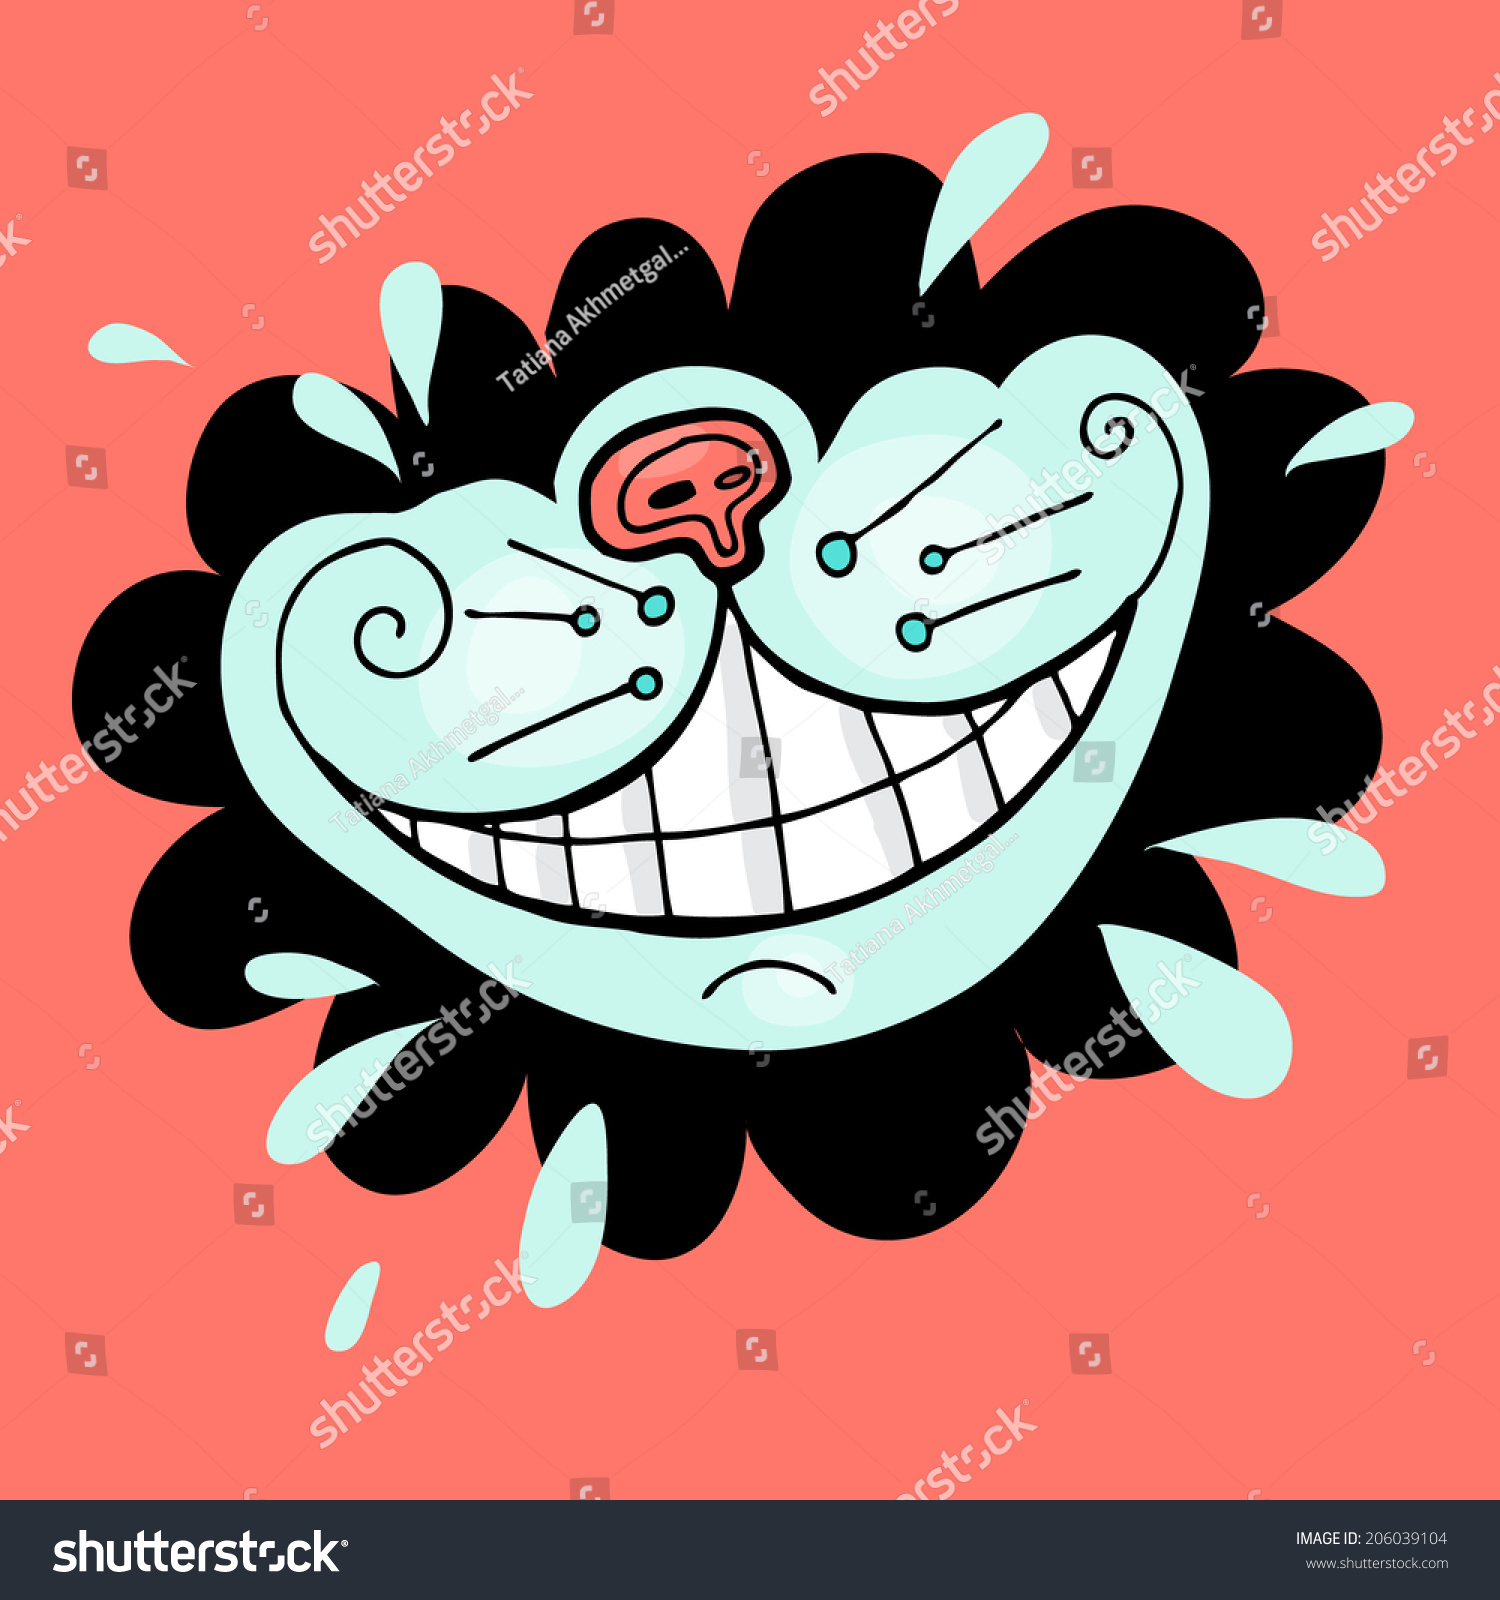 SVG of Vector hand-drawn illustration with the smile of  a cheshire cat for the tale Alice in Wonderland svg